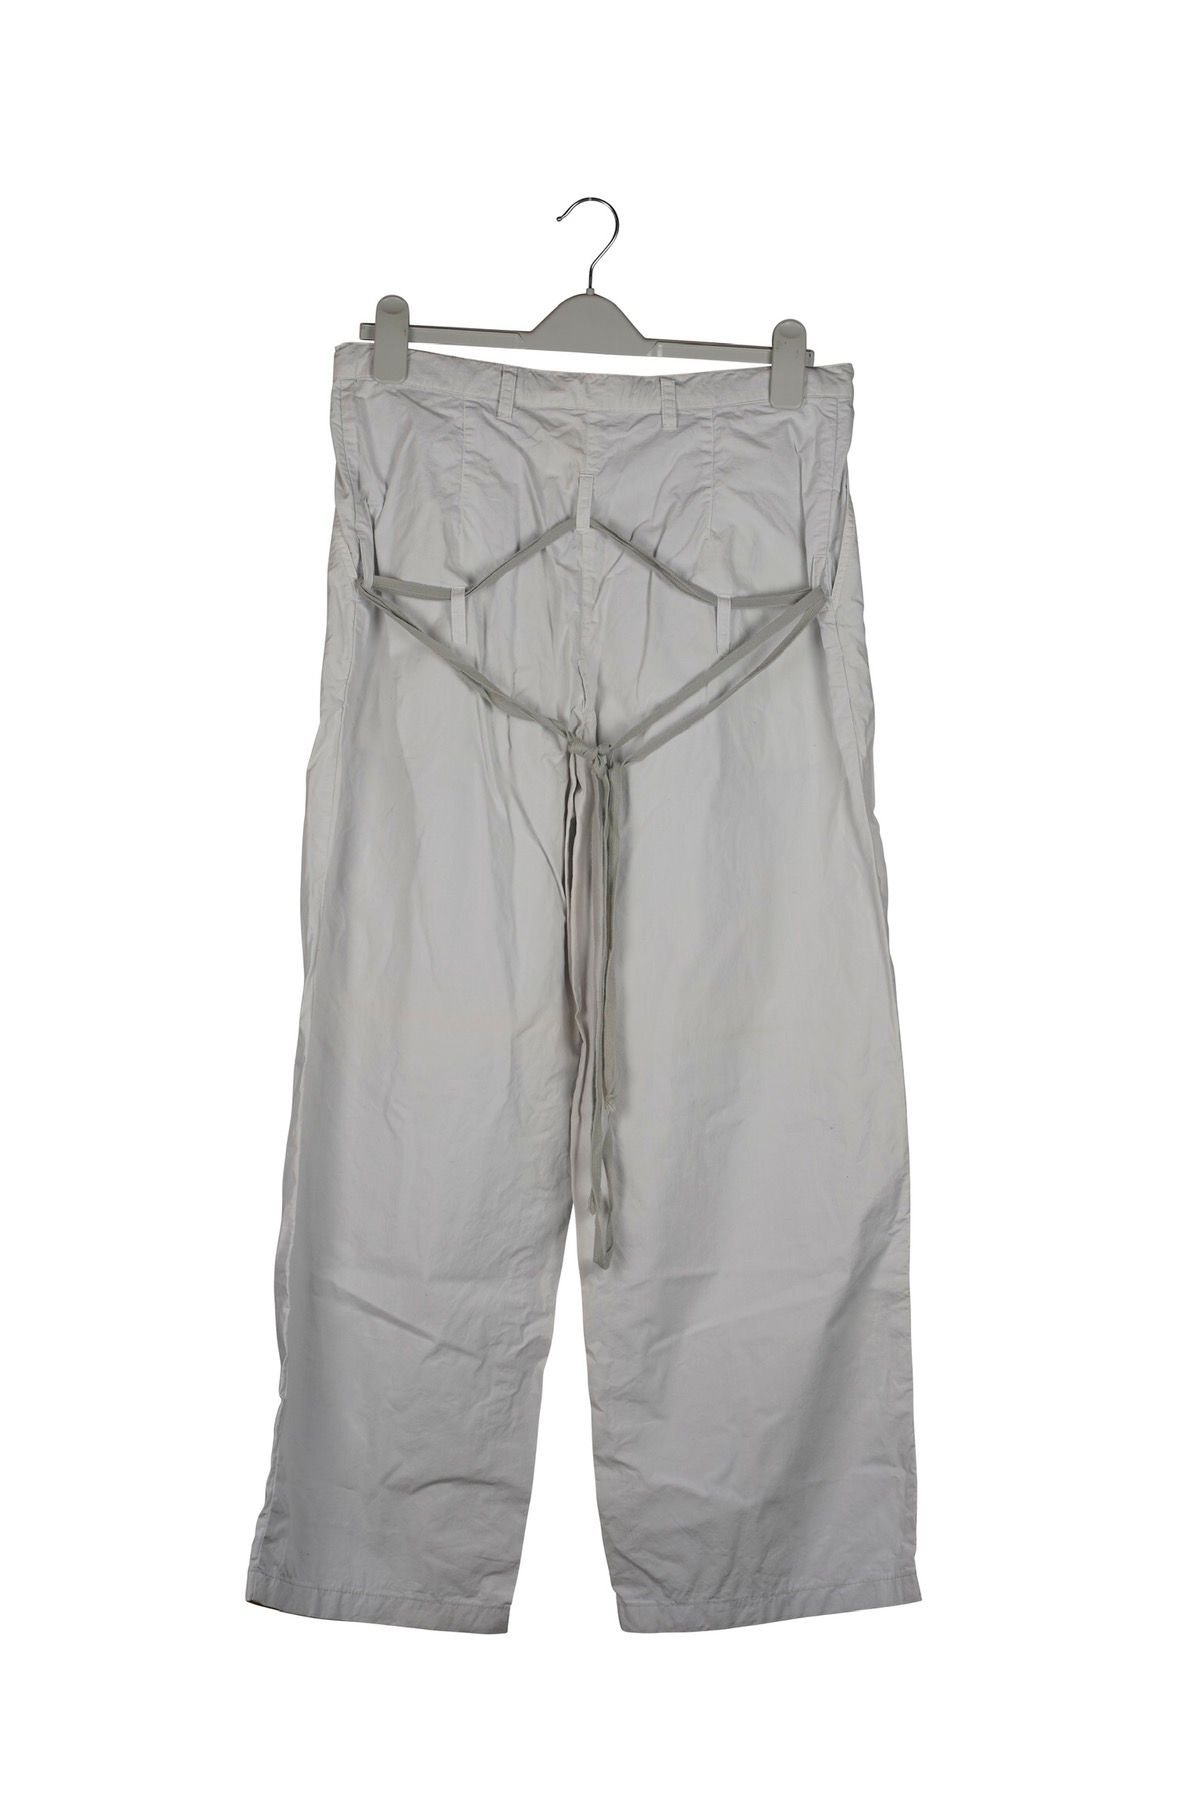 Pre-owned Raf Simons Ss 2004 Drawstring Pant In White